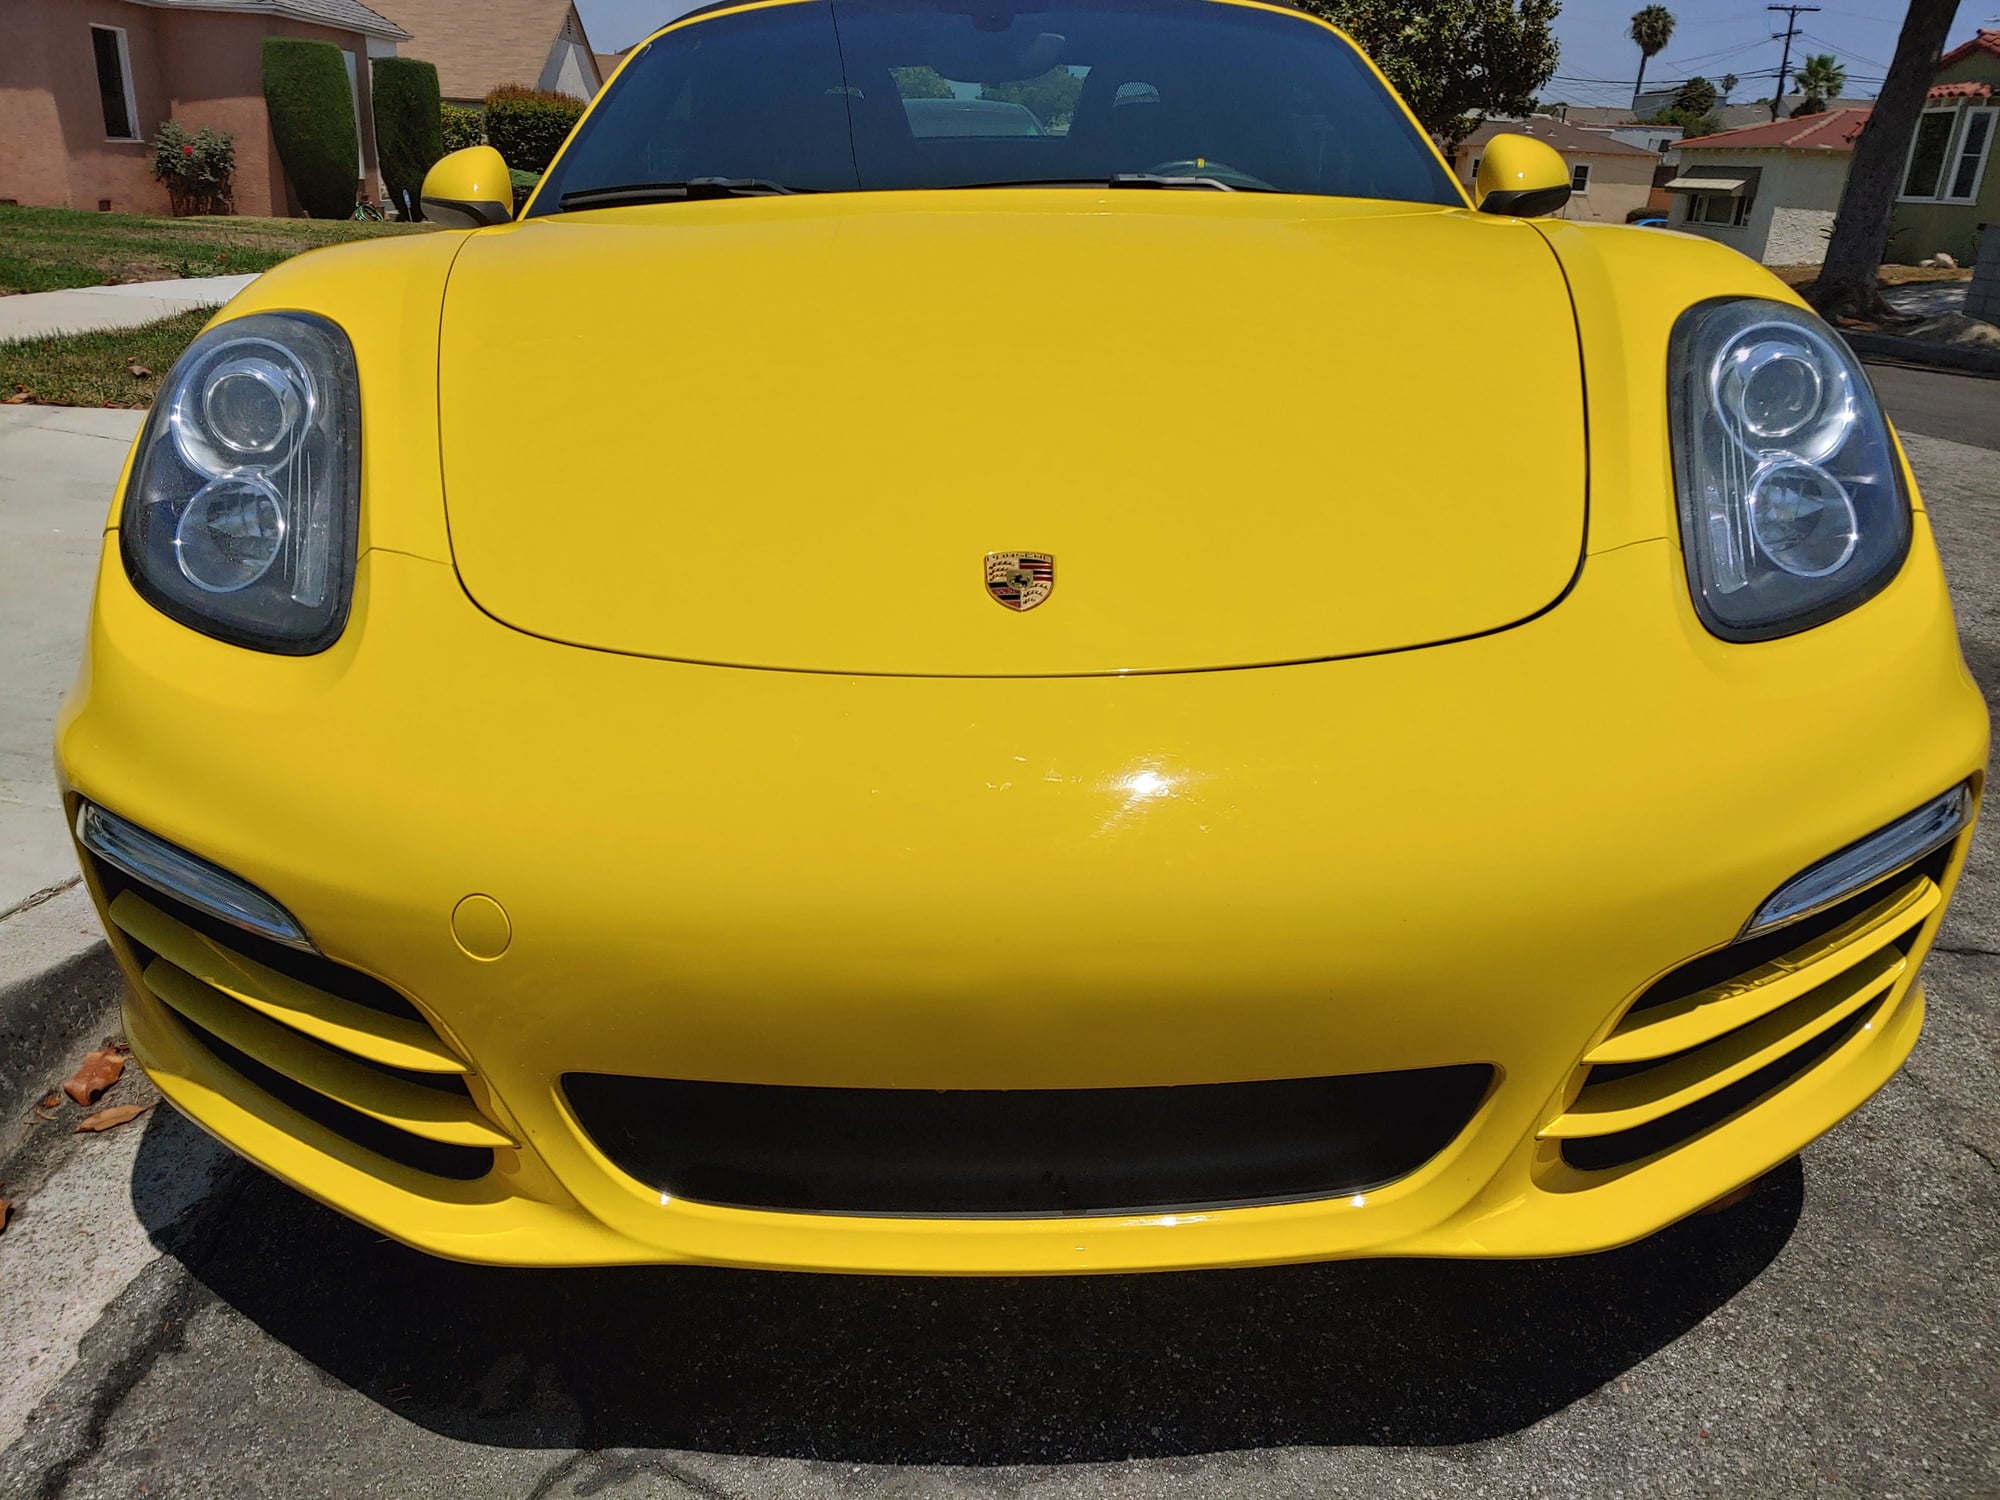 2014 Porsche Boxster - 2014 Porsche Boxster PDK // Racing Yellow // Black Interior // 20" Wheels // BOSE - Used - VIN WP0CA2A83ES120168 - 59,000 Miles - 6 cyl - 2WD - Automatic - Convertible - Yellow - Los Angeles, CA 90047, United States